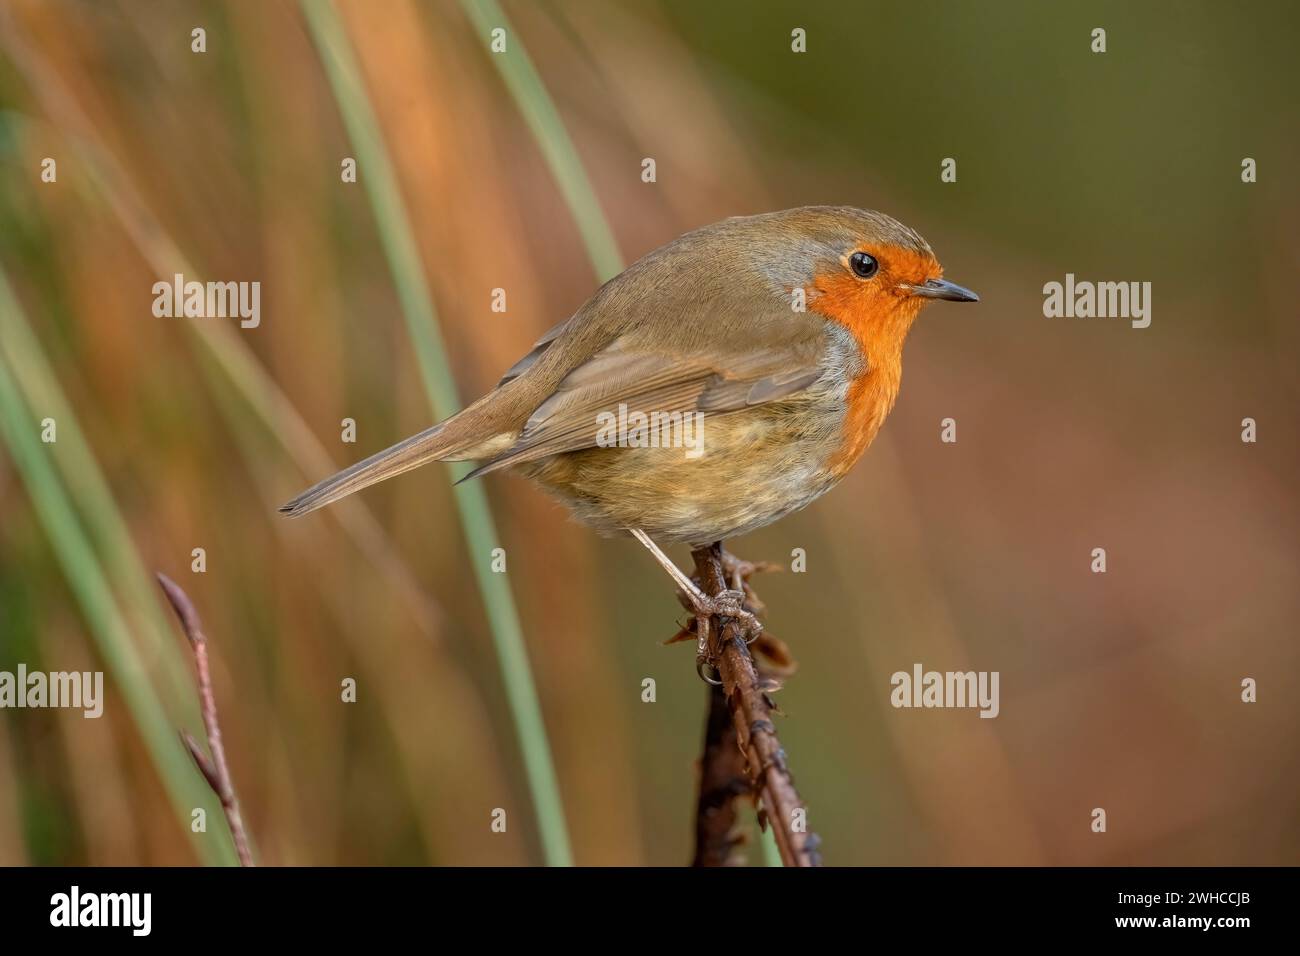 Side view of a Robin with a blurred background perched on a twig close up in a forest in Scotland uk Stock Photo